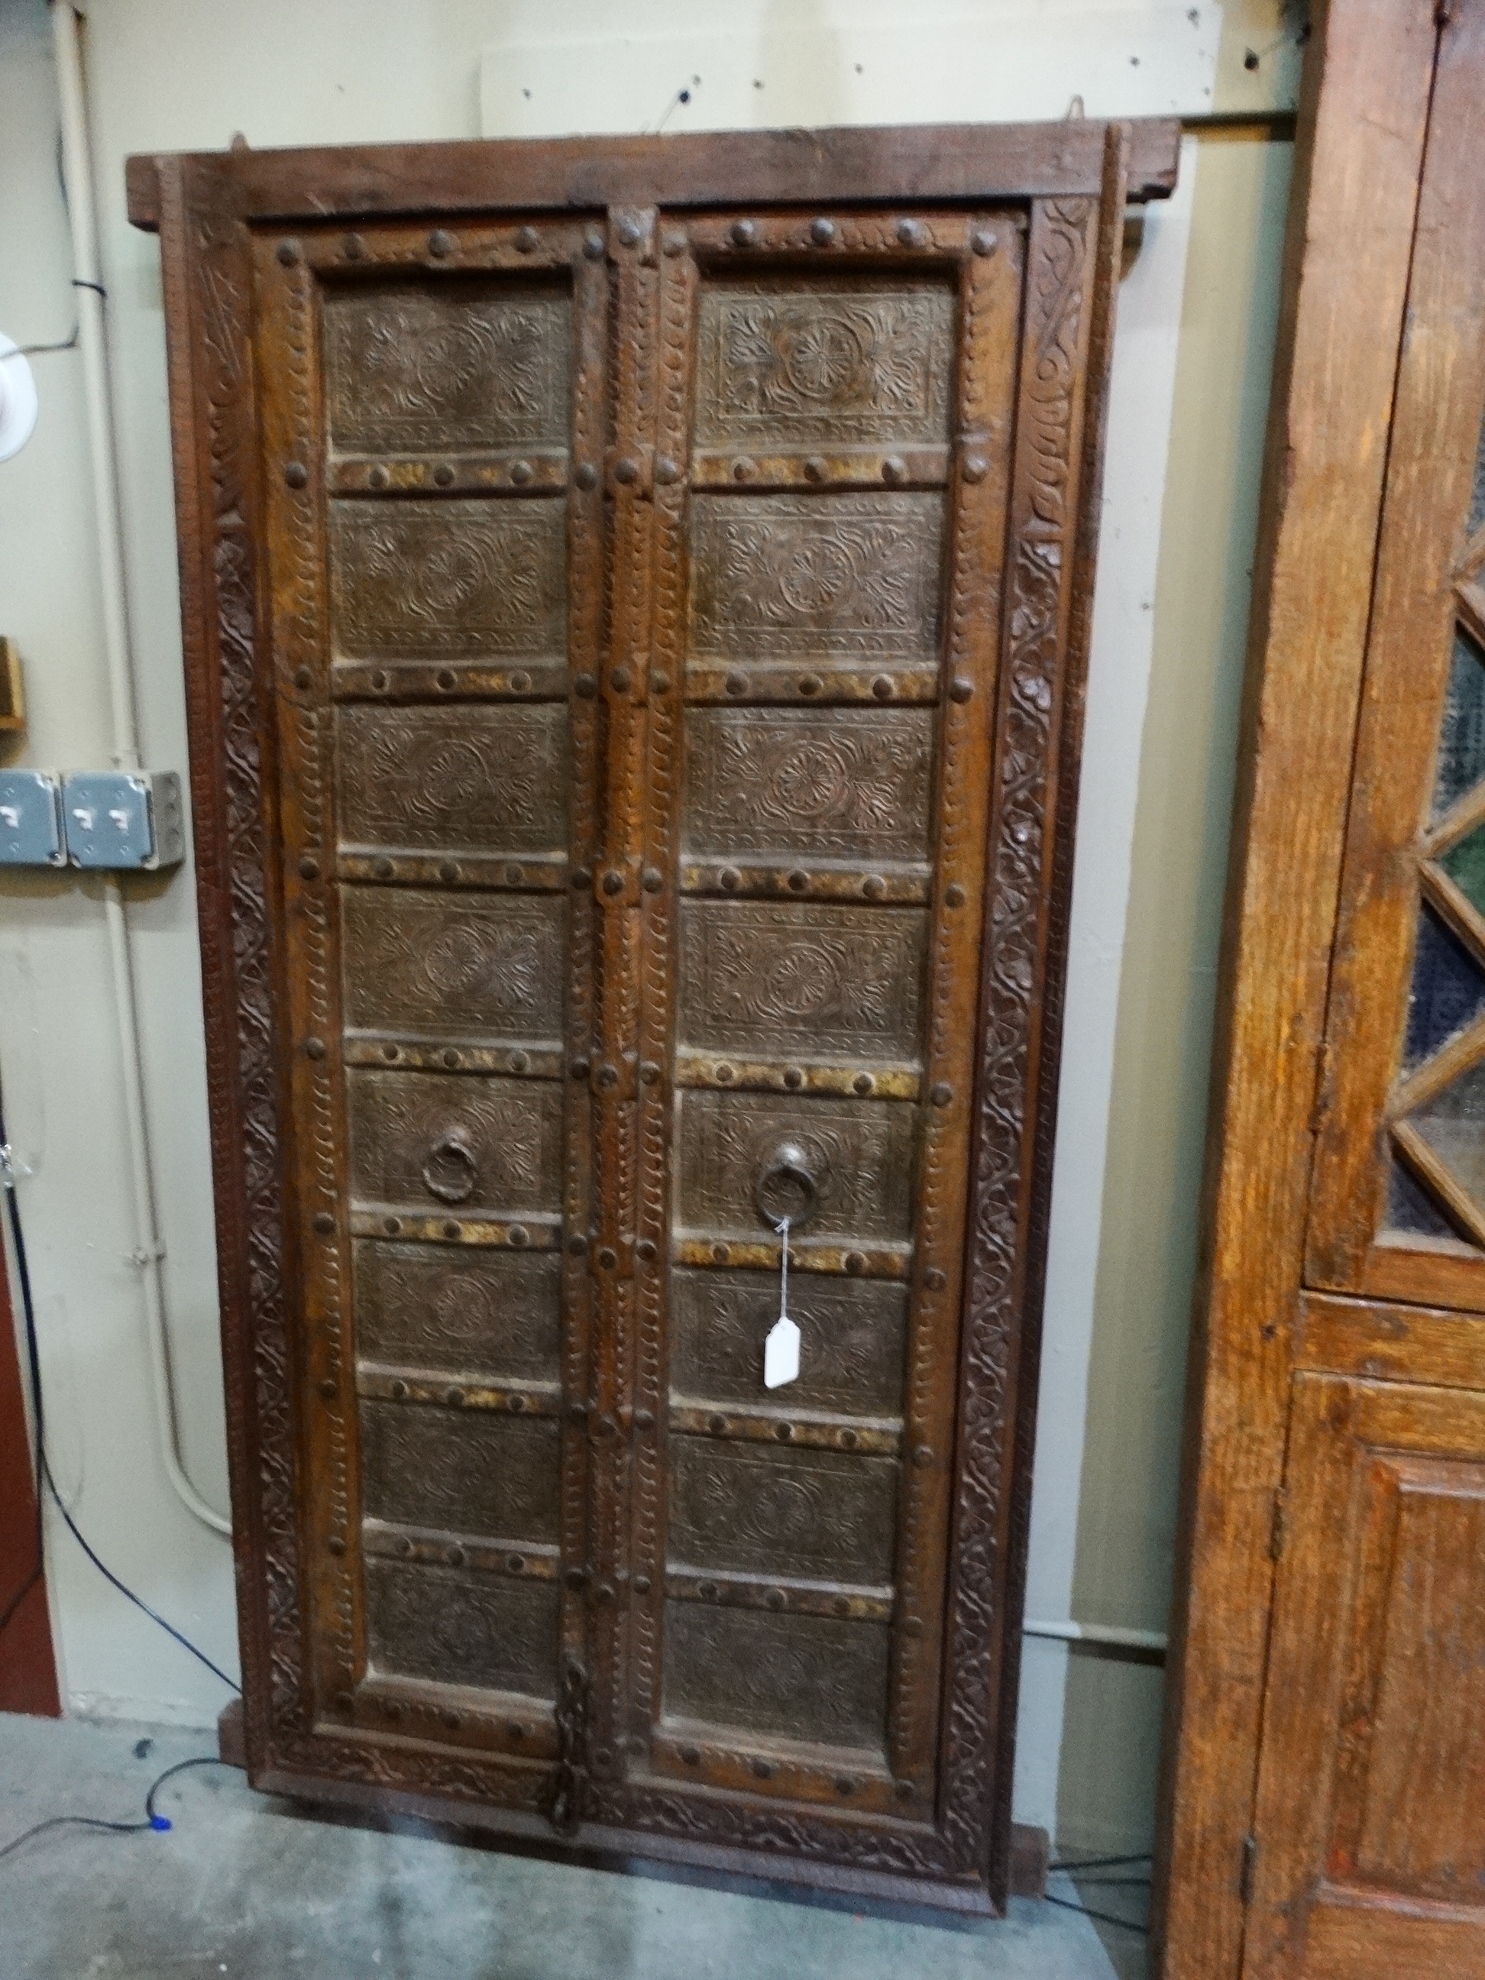 Architectural Salvage Antique Doors with Metal Accents Furniture Stores Denver